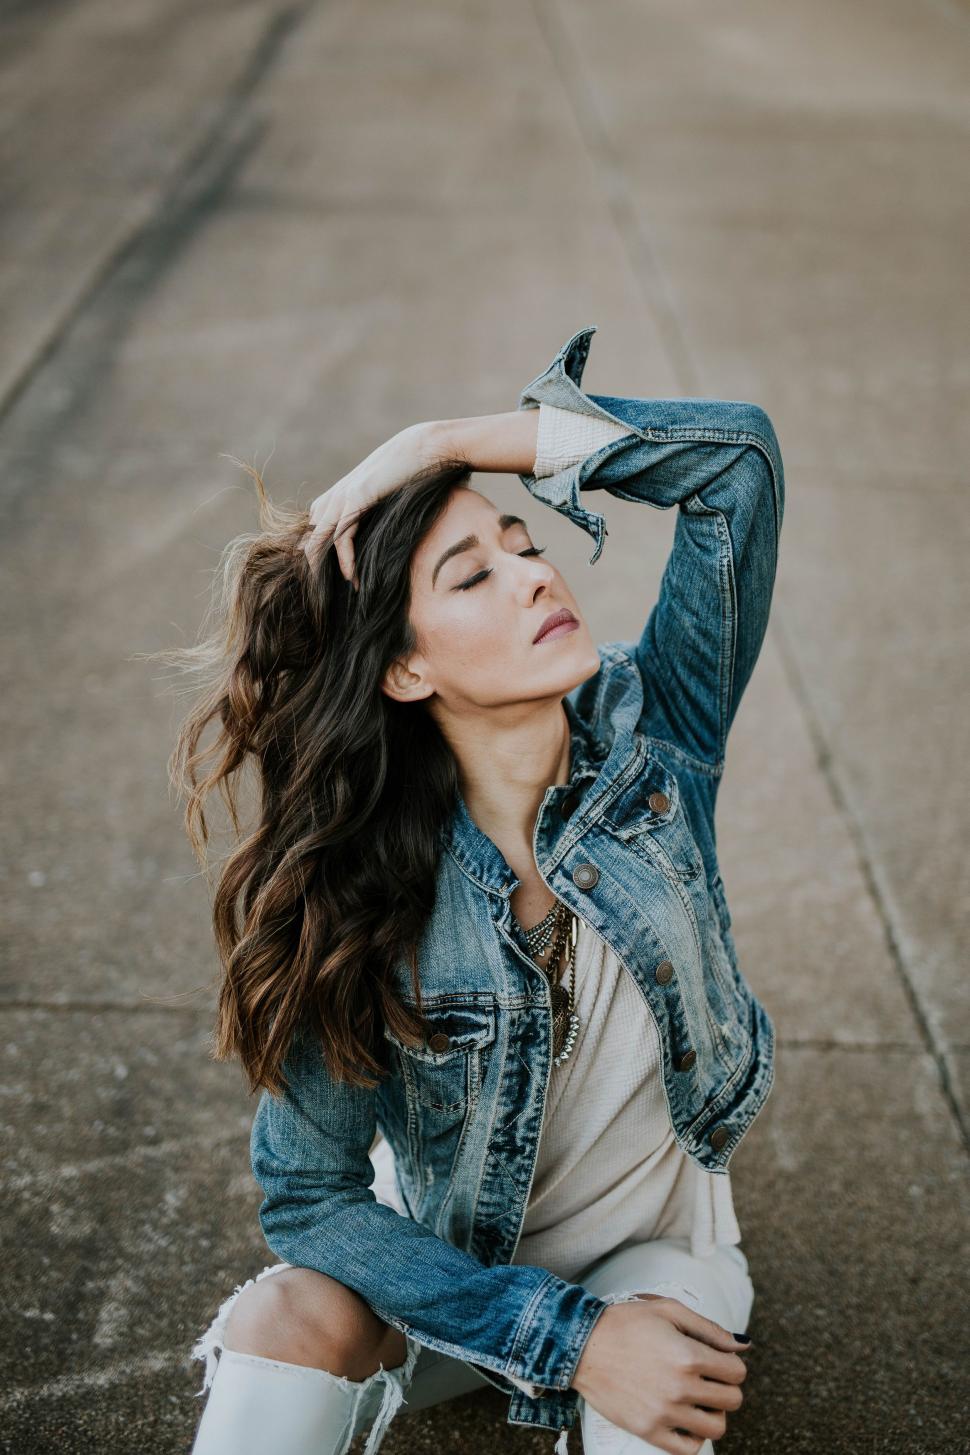 Free Image of Woman Sitting on Ground in Jean Jacket 